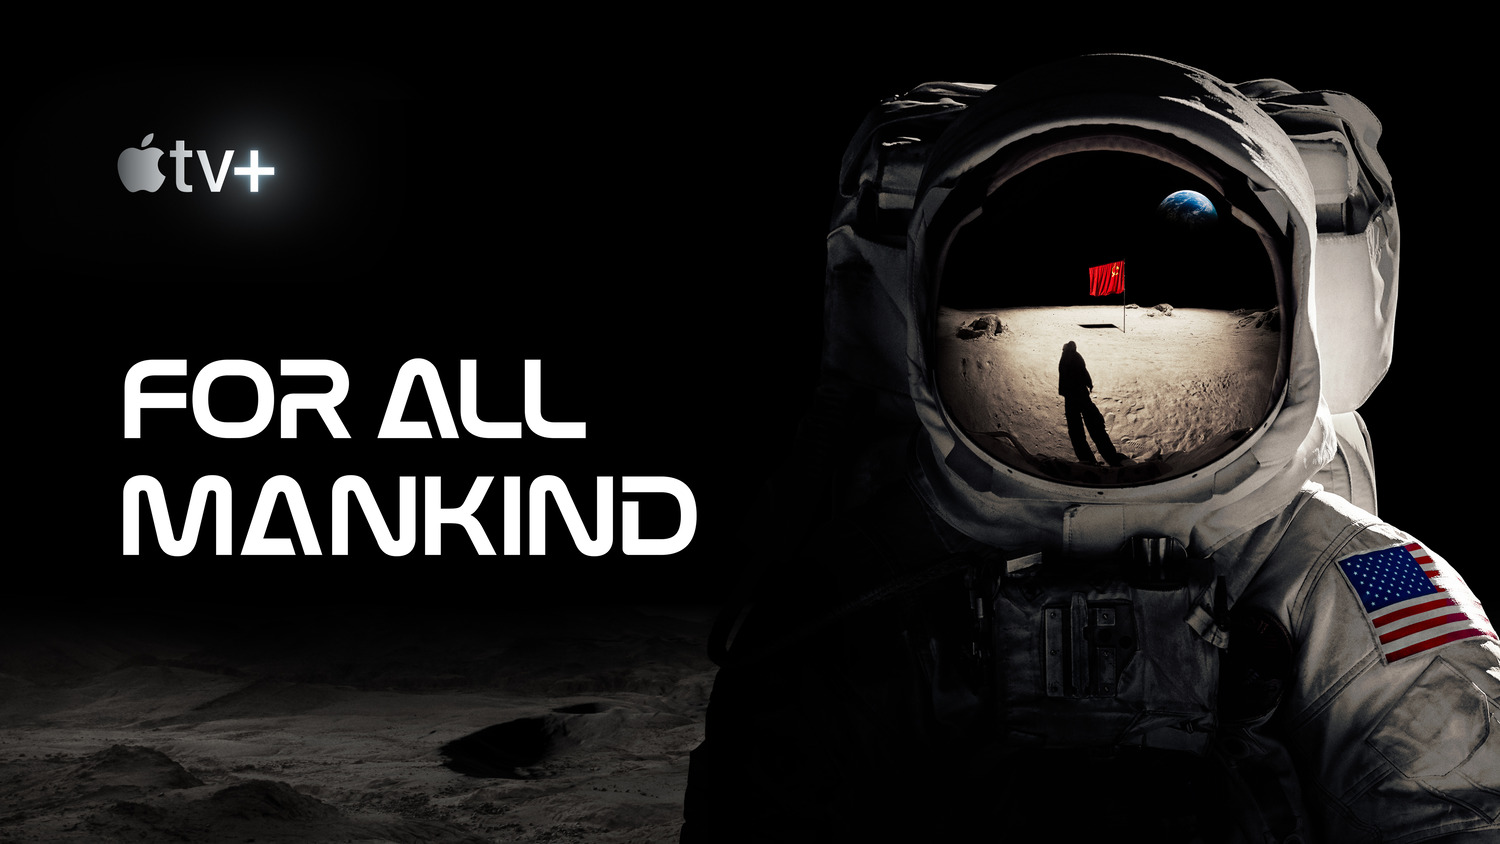 Extra Large TV Poster Image for For All Mankind (#2 of 7)